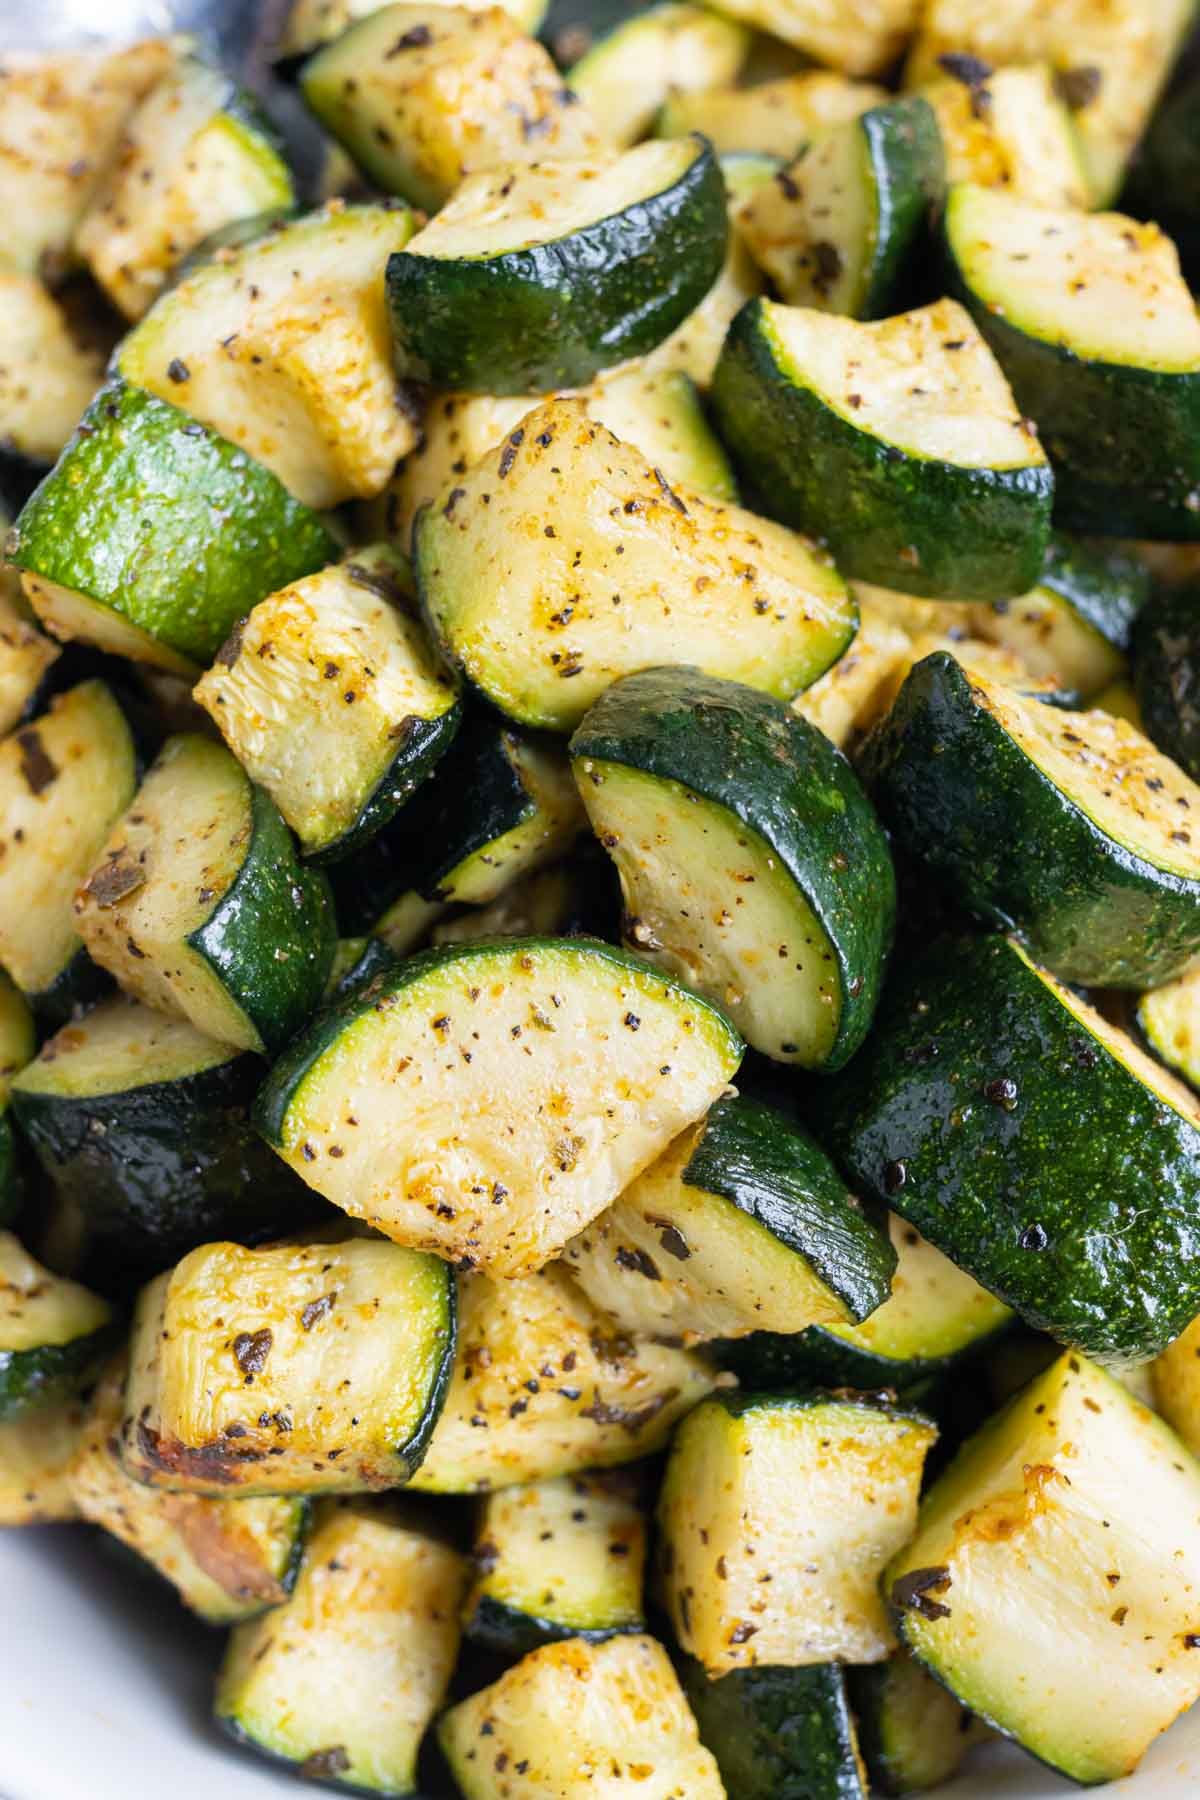 A close up view of perfectly cooked zucchini to serve as a healthy side dish.